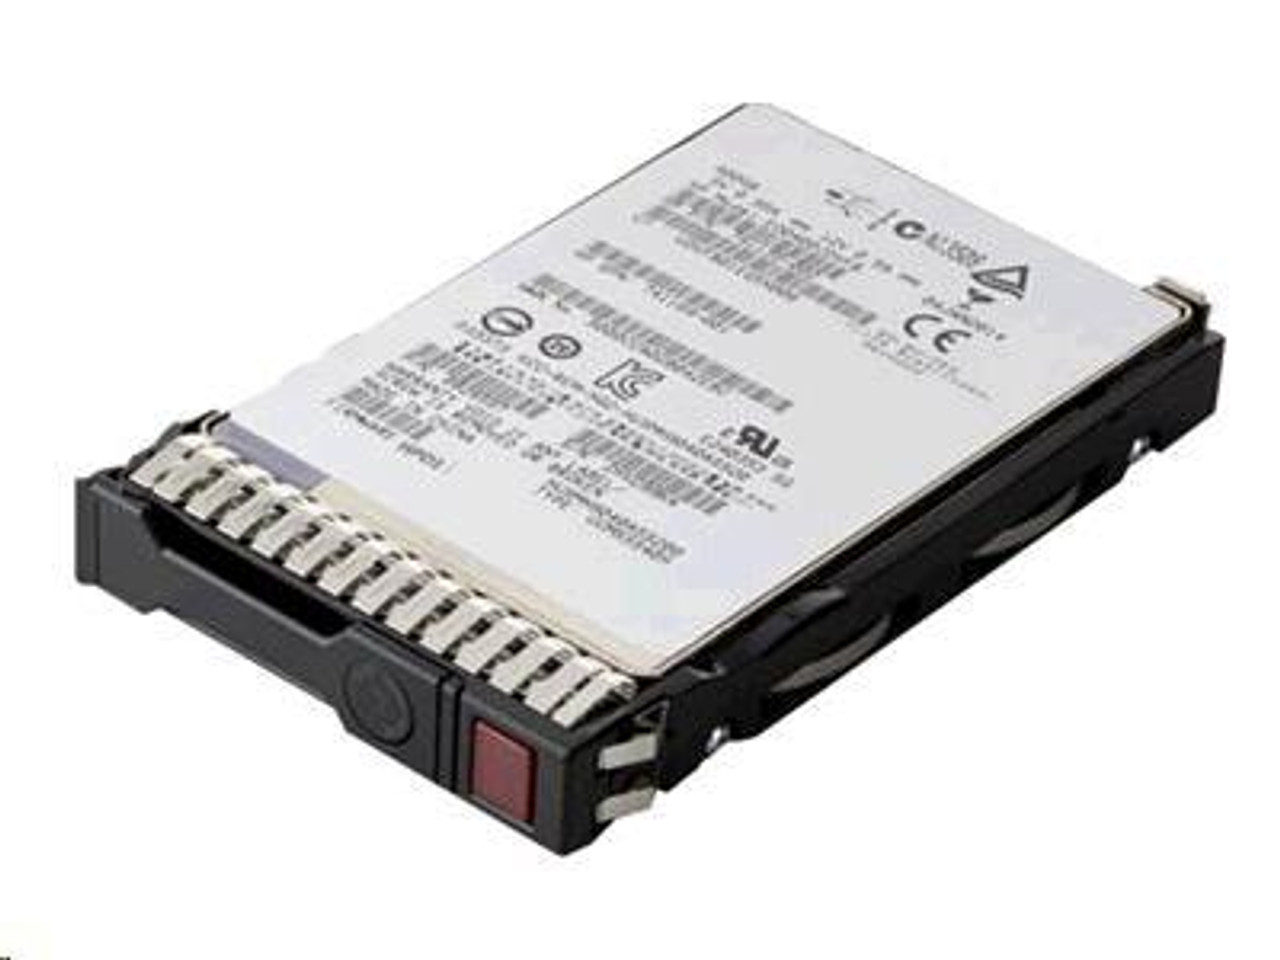 P05986-H21 HPE 1.92TB SATA 6Gbps Mixed Use 2.5-inch Internal Solid State Drive (SSD) with Smart Carrier